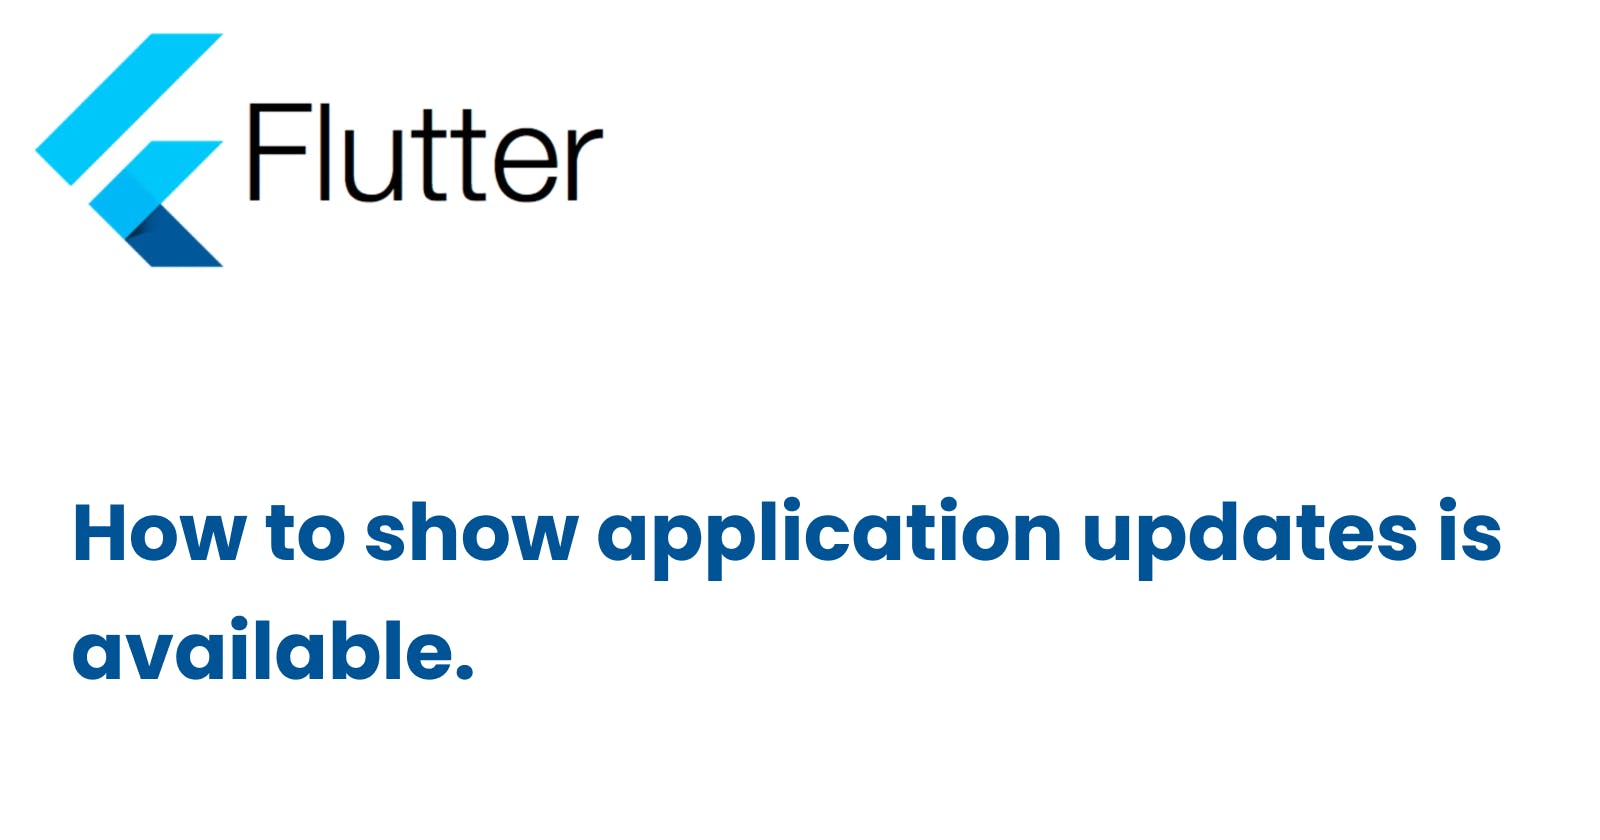 Flutter: How to show application updates is available.